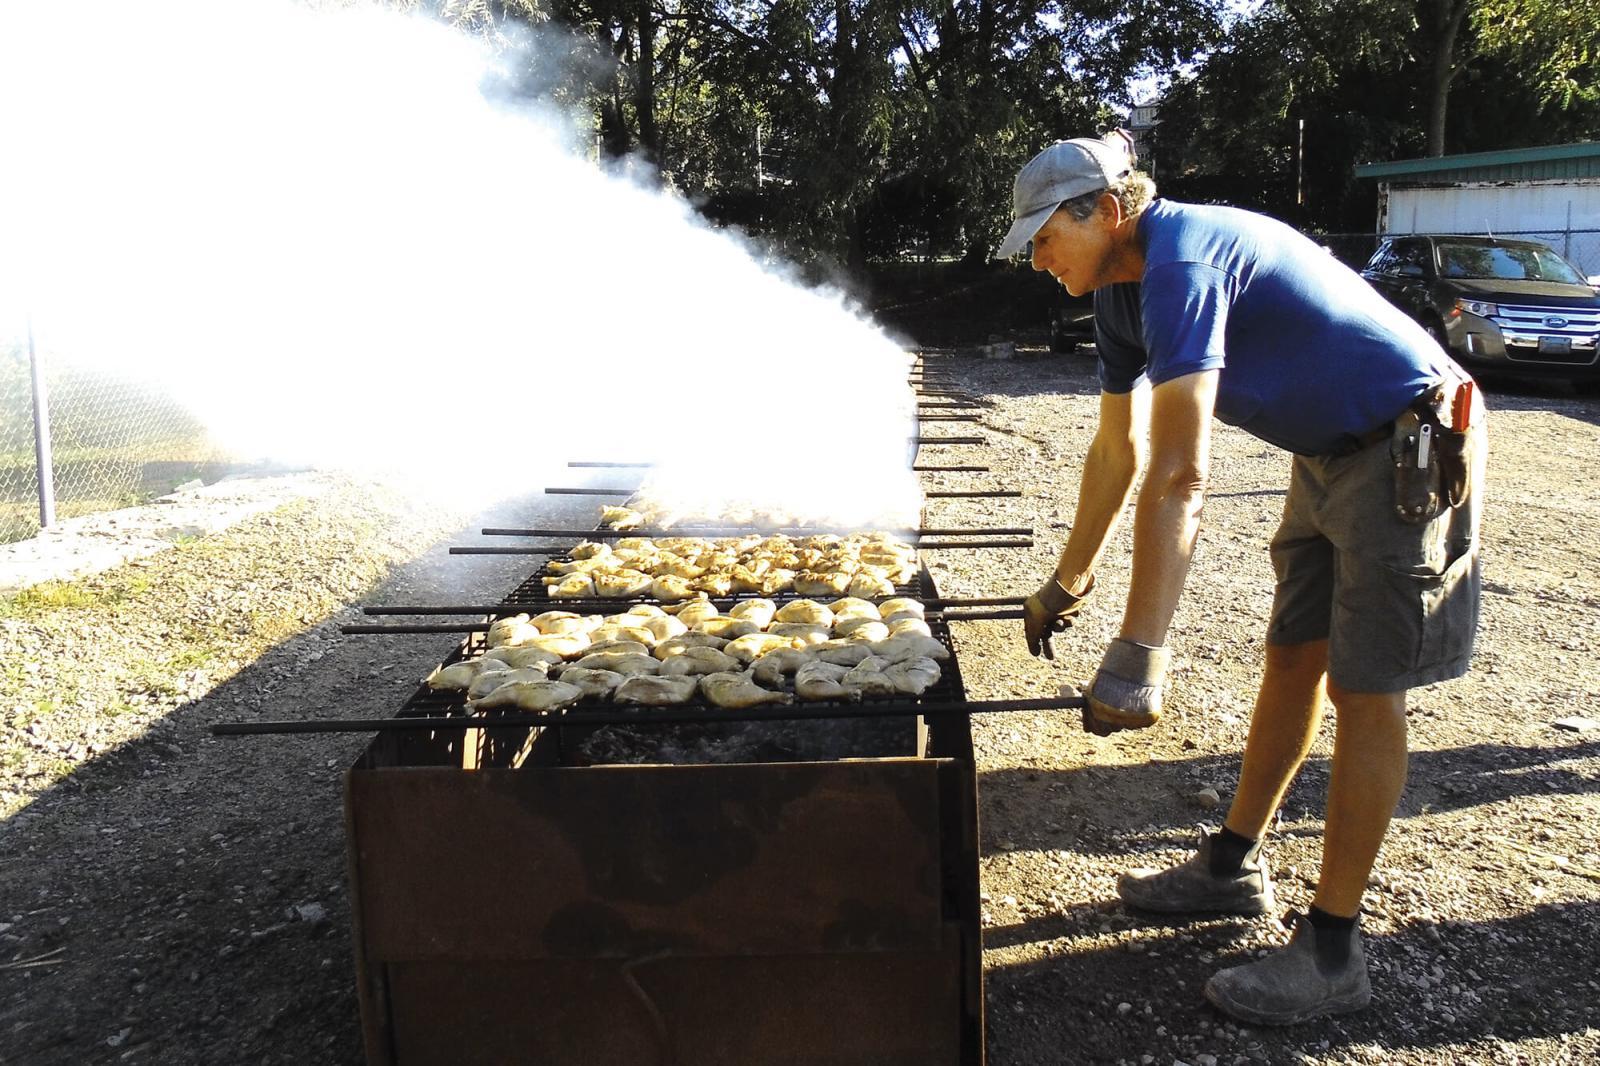 Over 275 enjoy Chapter’s 25th annual chicken roast